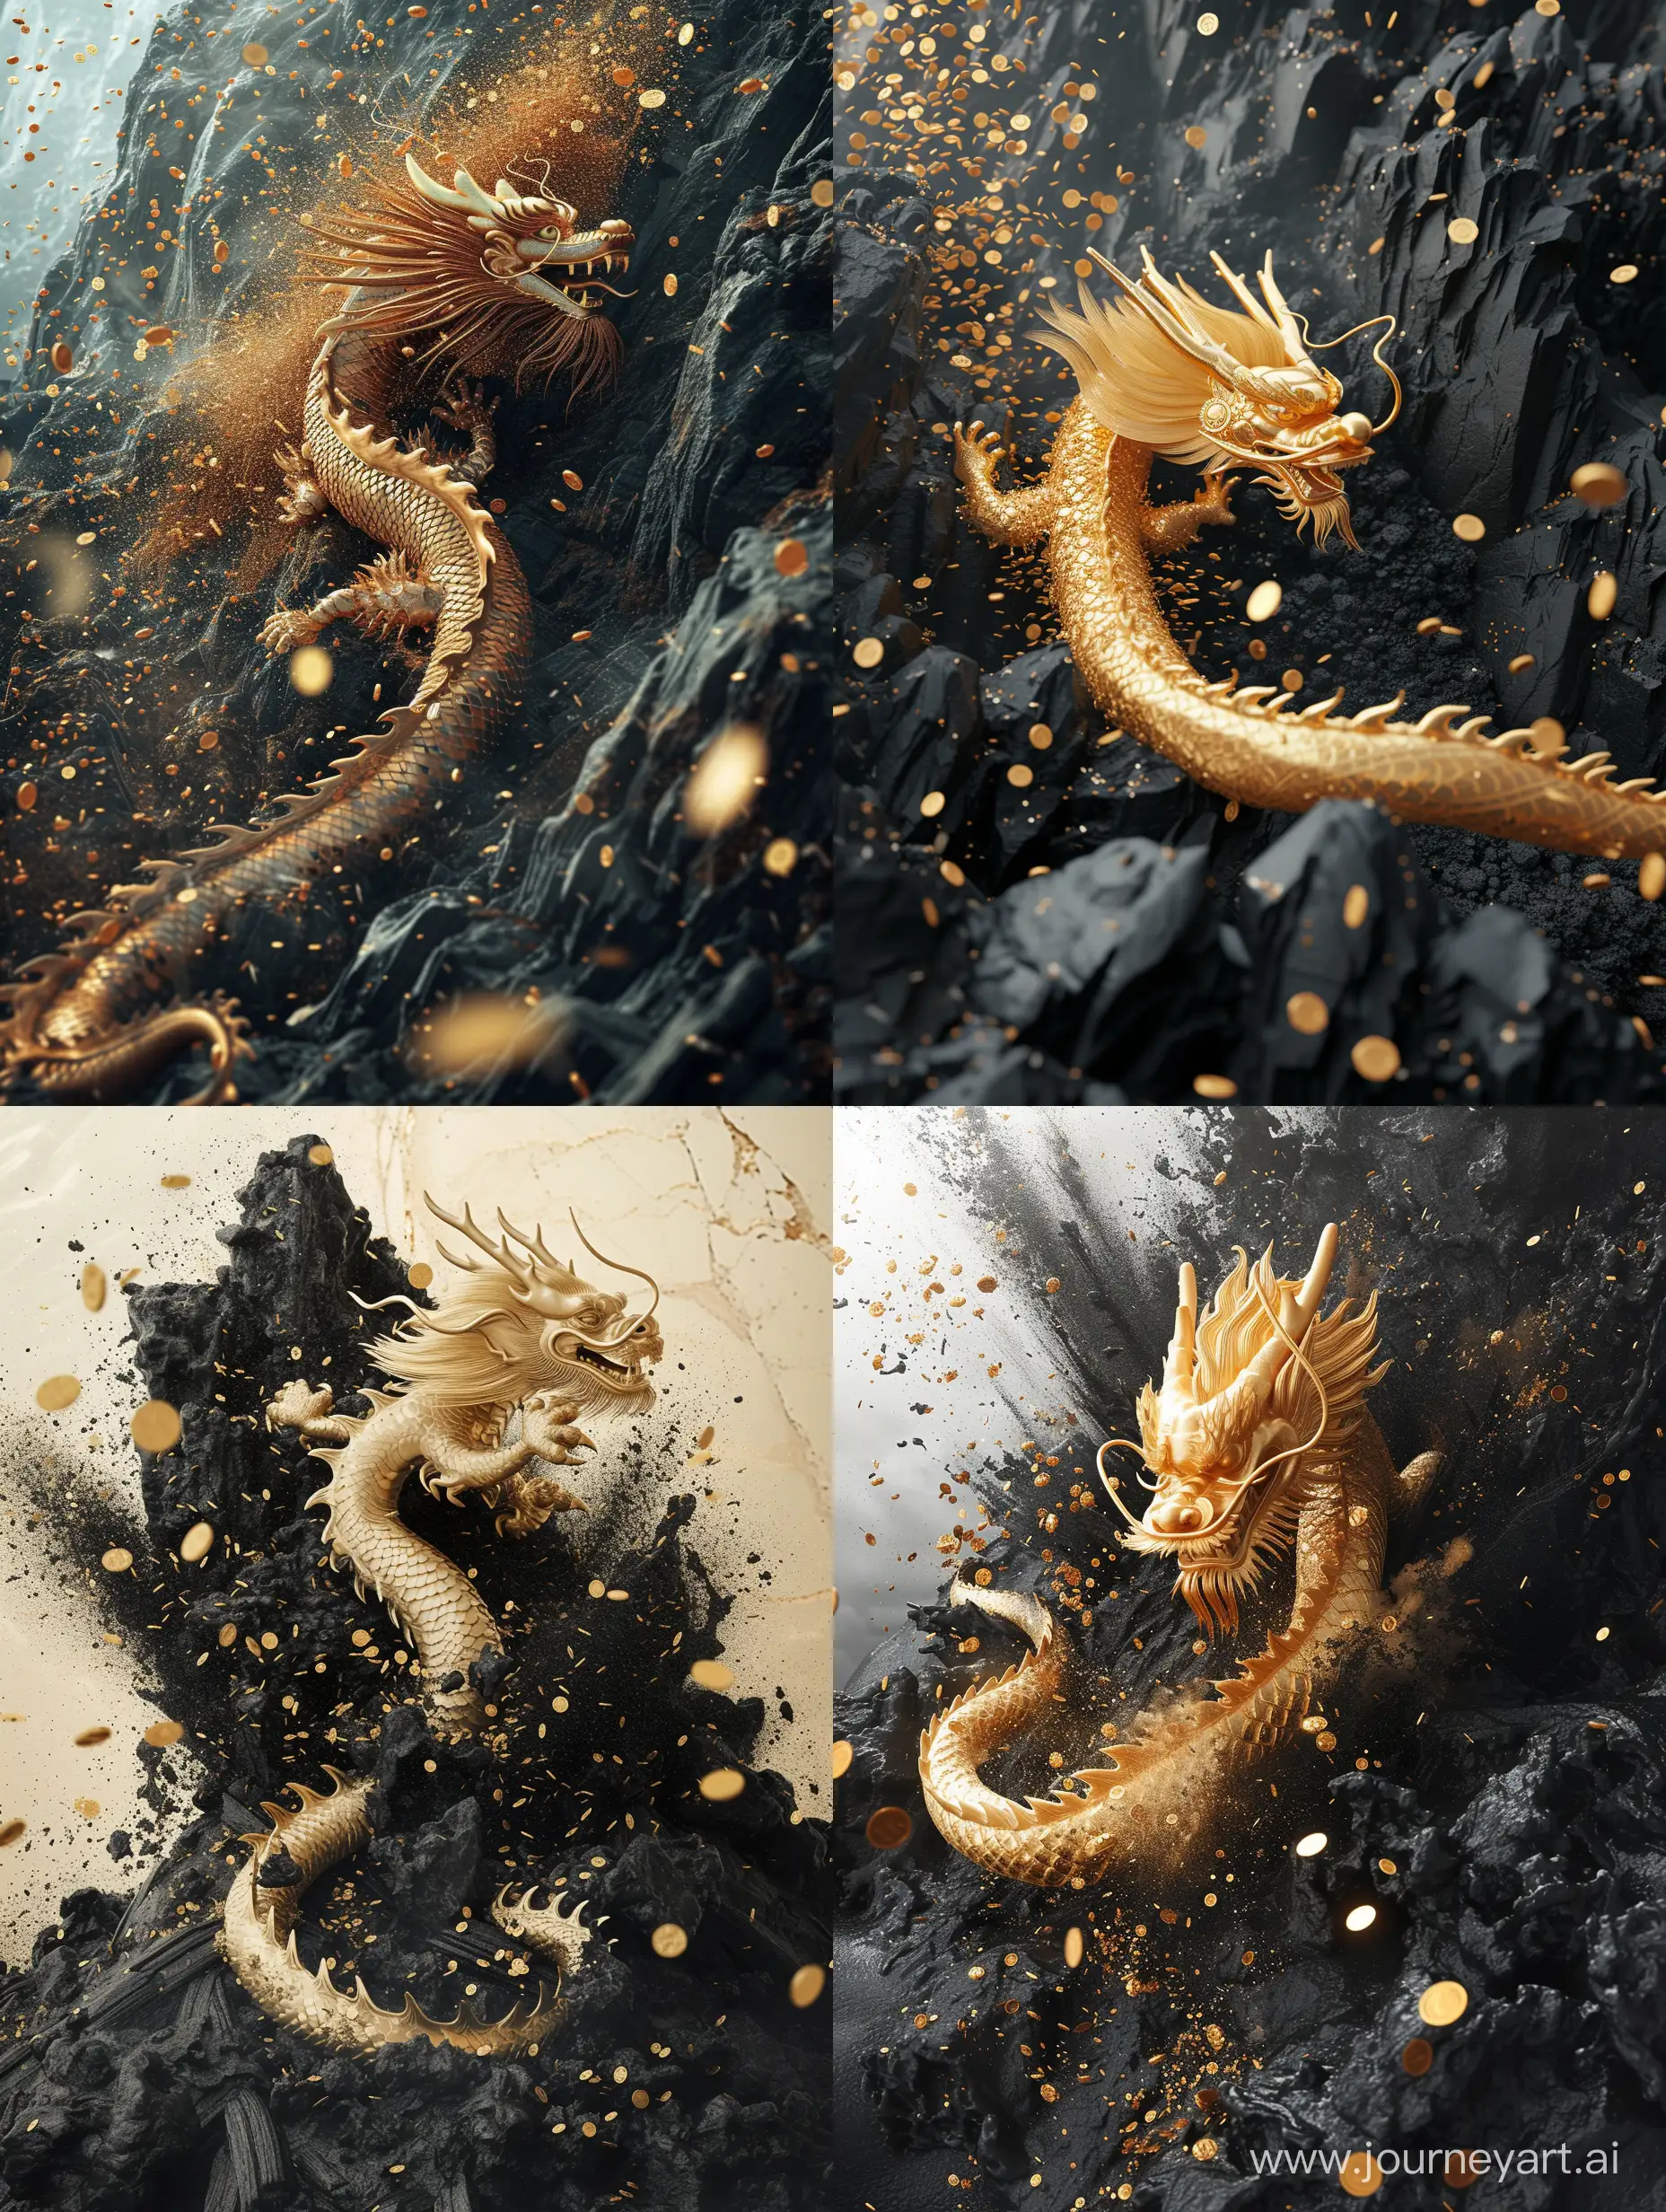 A golden dragon rushes out of a black coal mine, the coal mine is sprinkled with gold coins, Chinese New Year elements, realistic details, OCtane